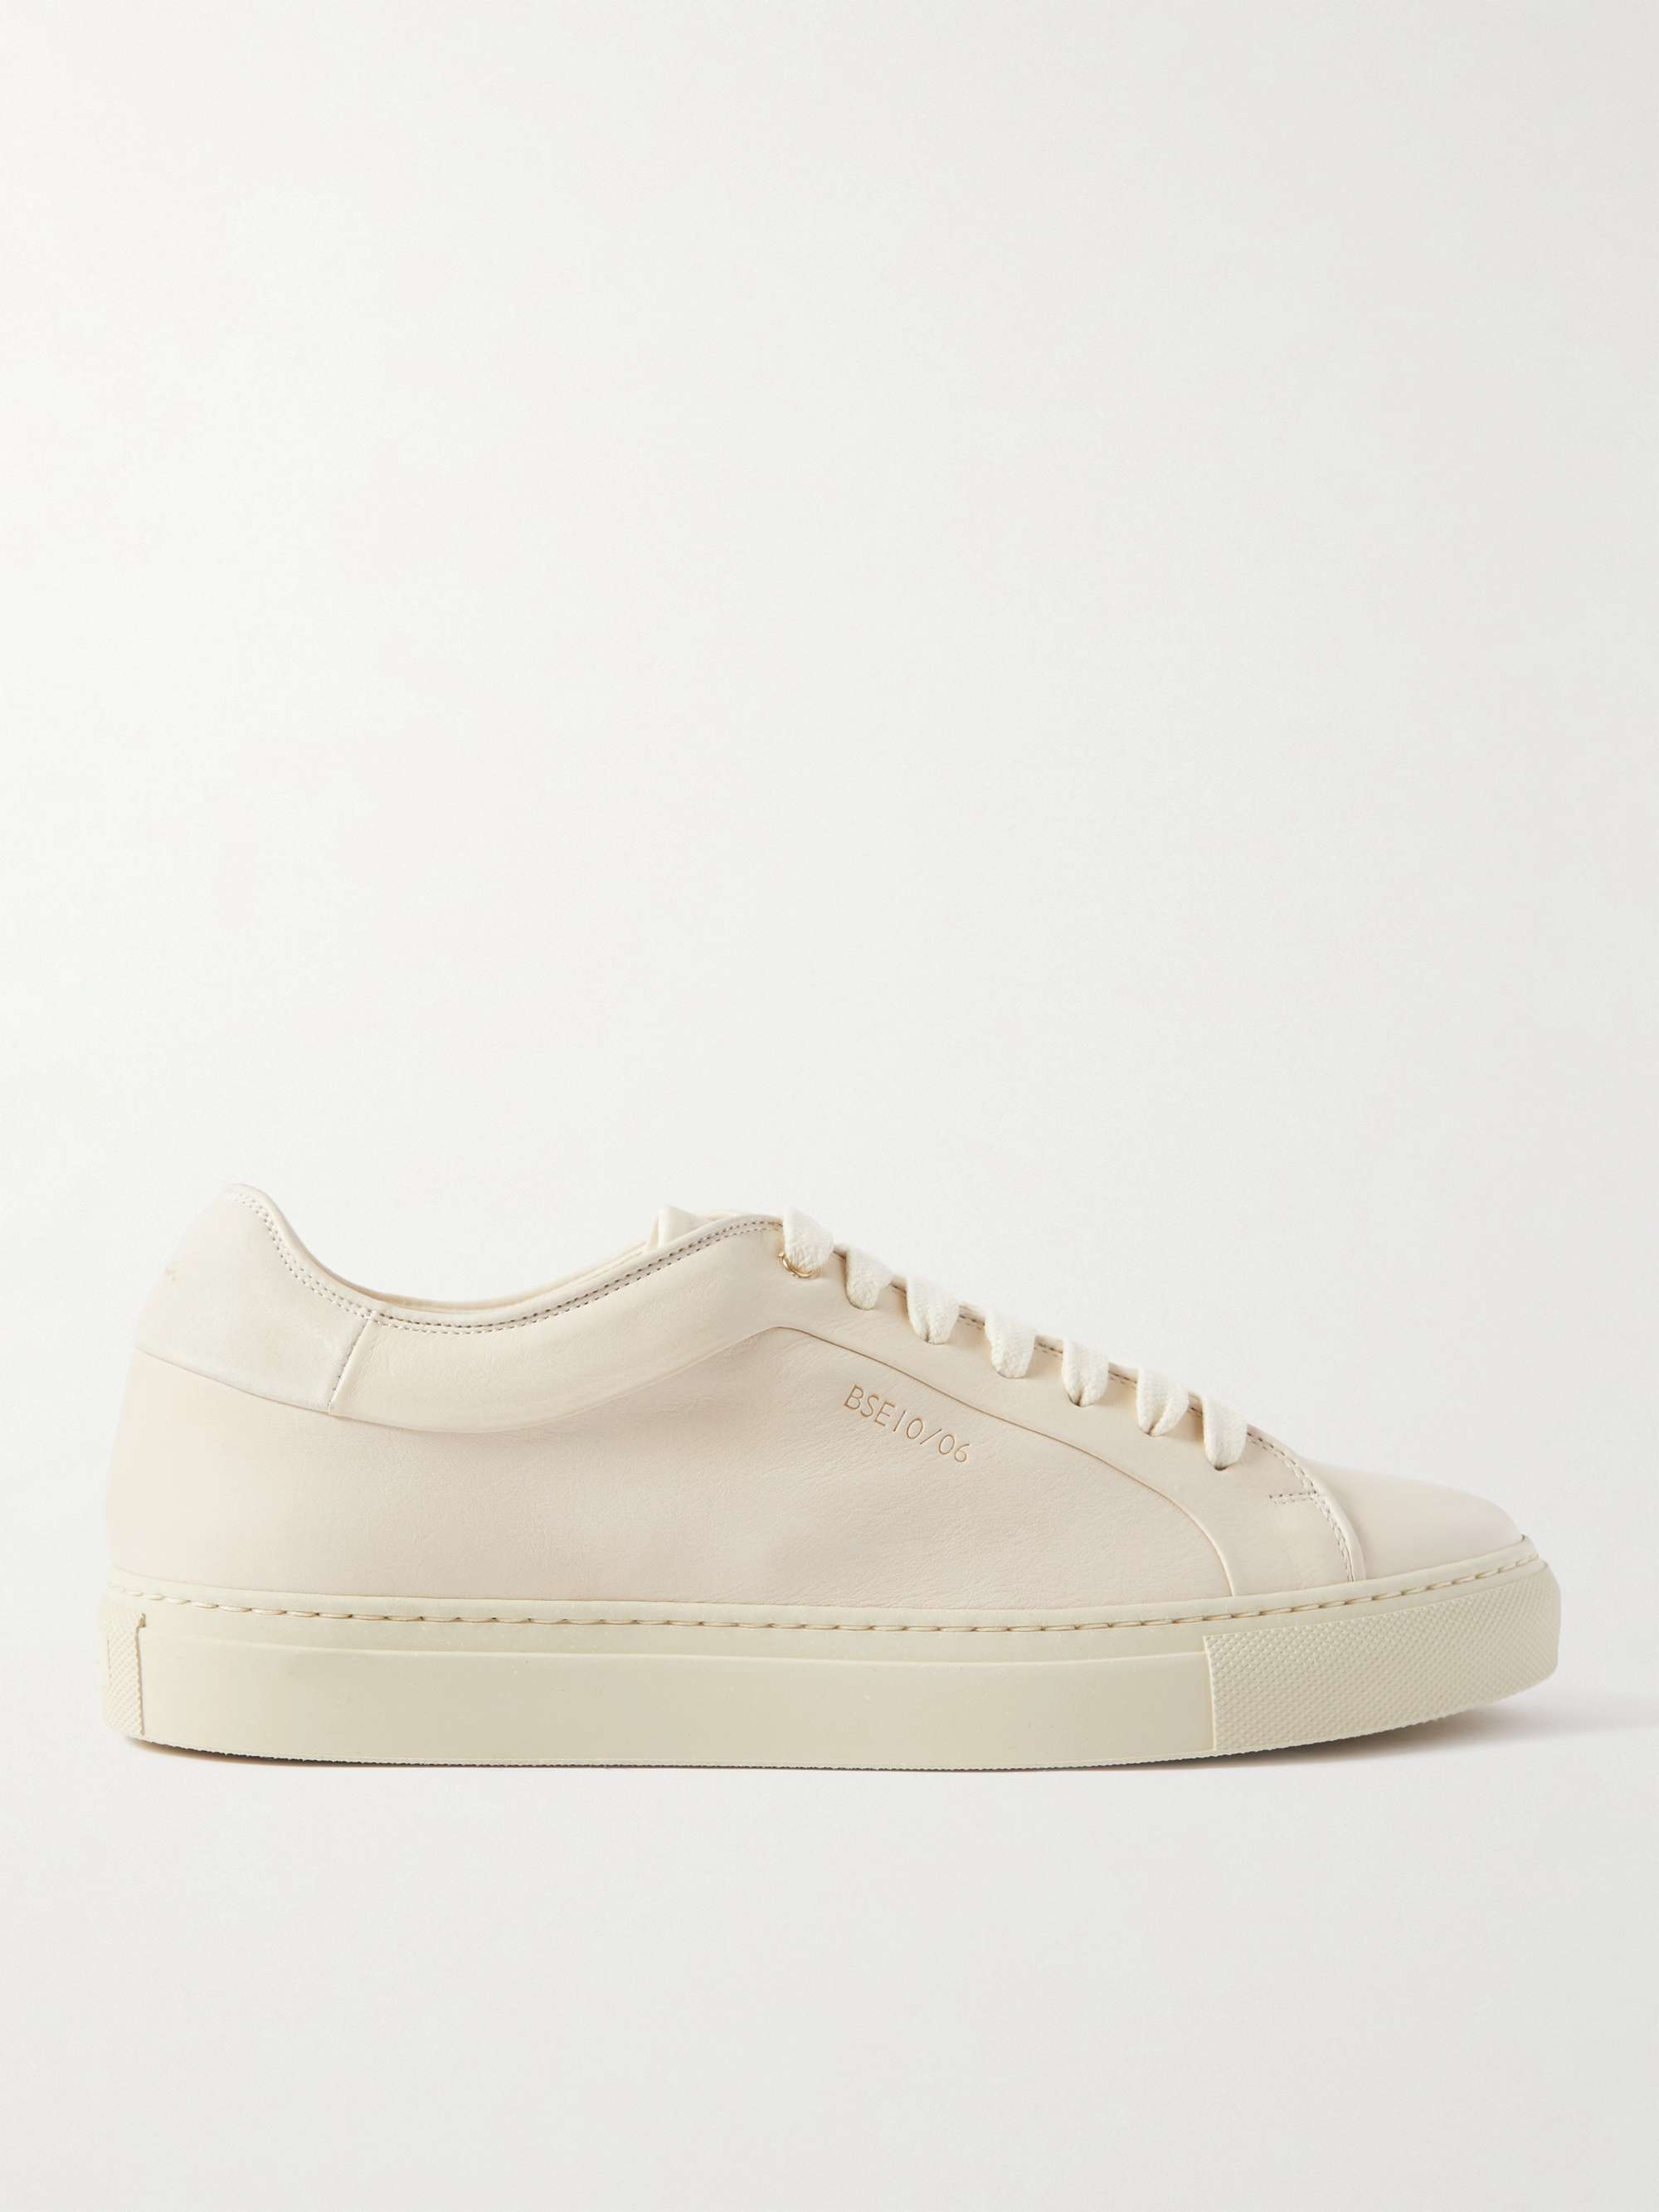 Off-white Basso ECO Leather Sneakers | PAUL SMITH | MR PORTER